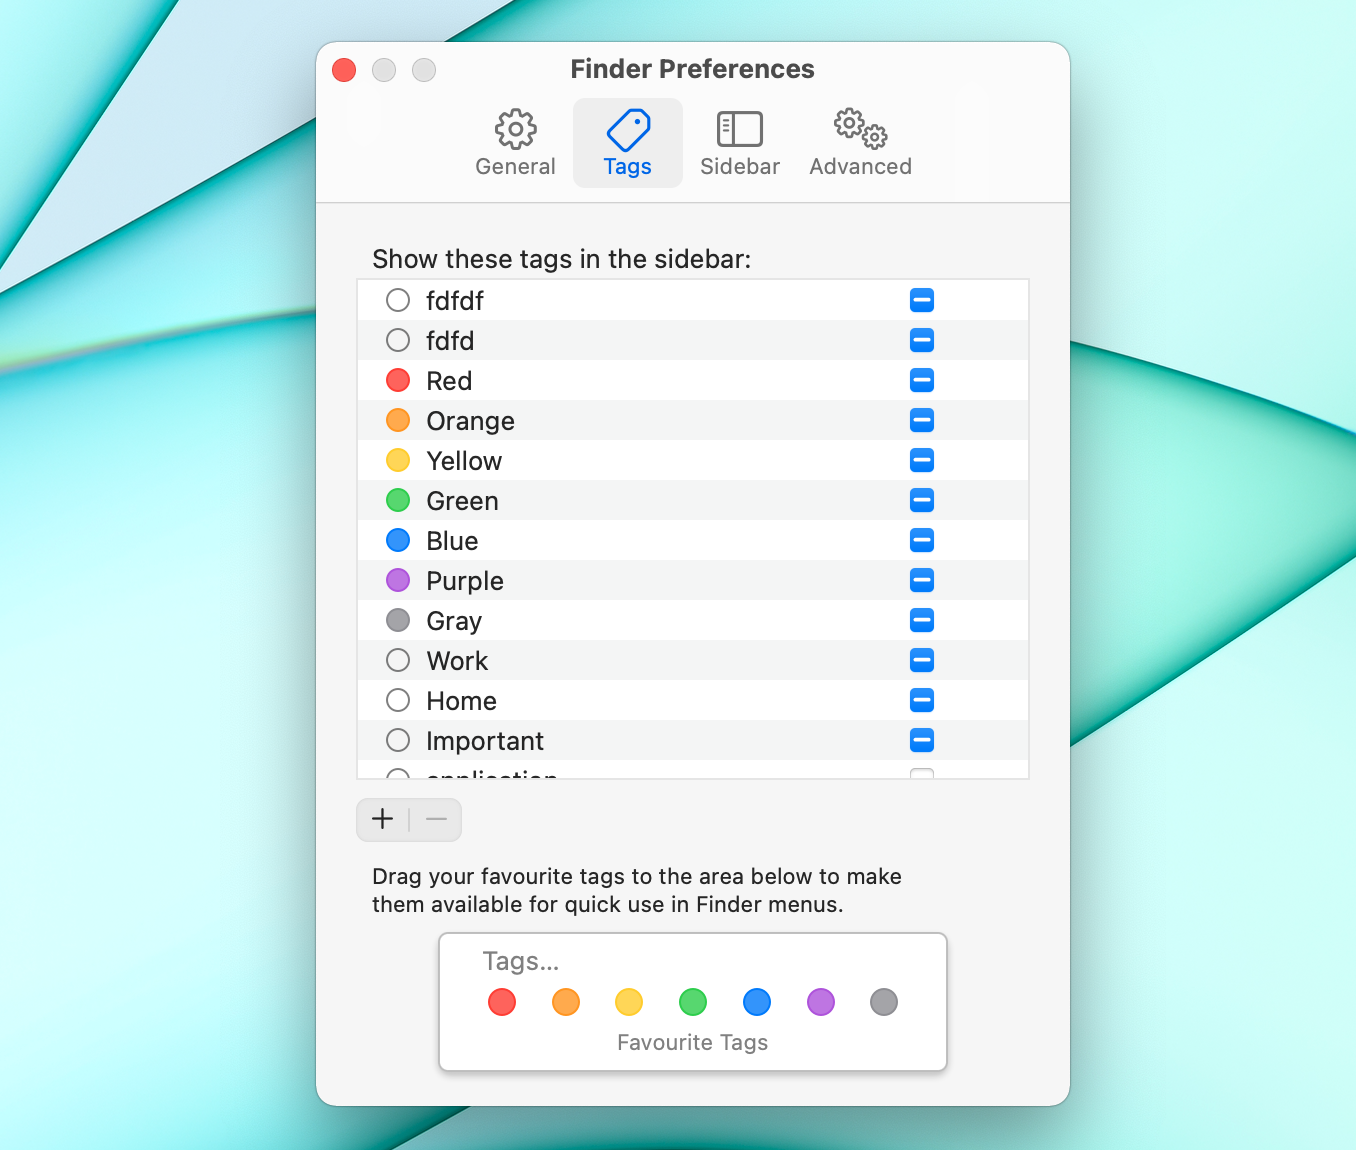 Drag your favourite tags to the area below to make them available for quick use in Finder menus